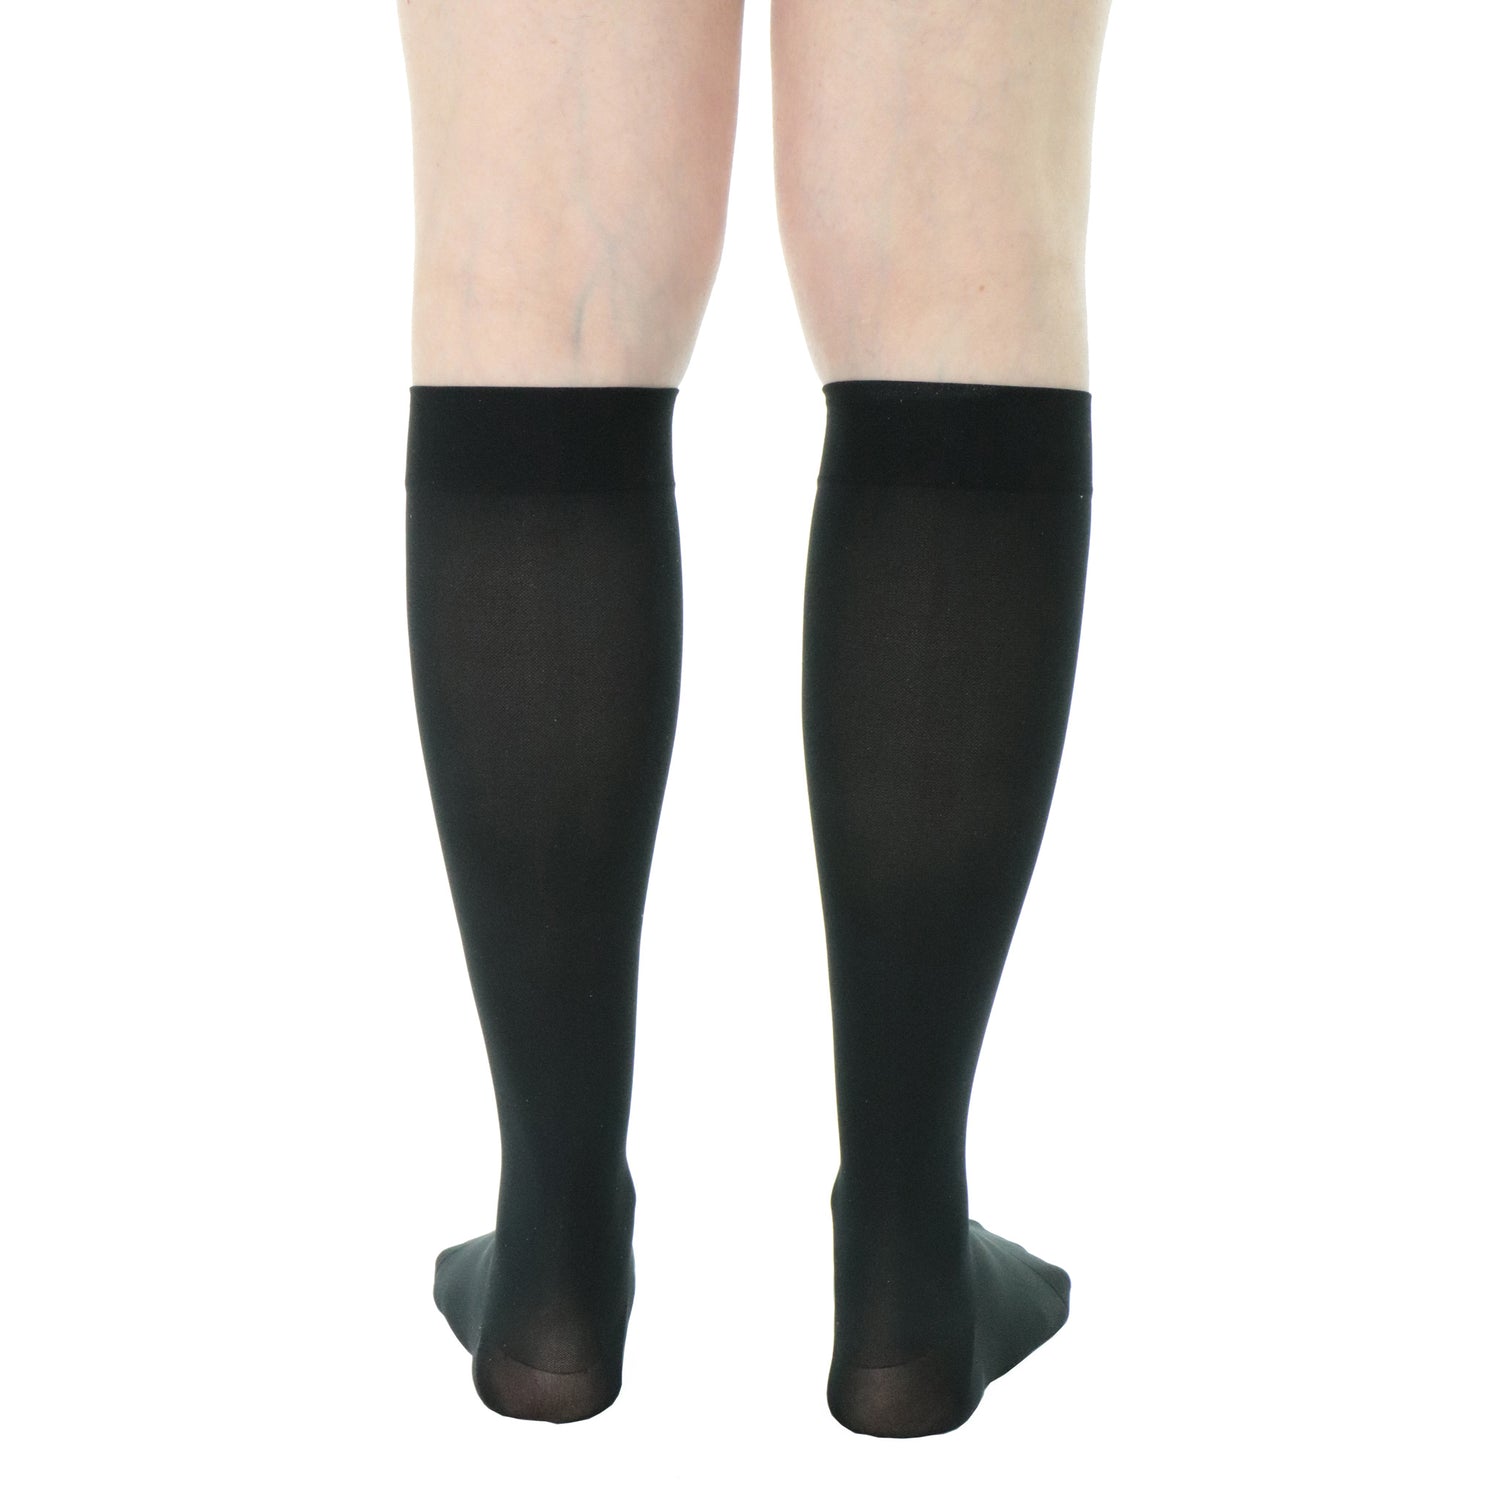 Compression Stockings Thigh High for Women Men 20-30 mmhg Graduated Compression  Socks Open Toe Compression